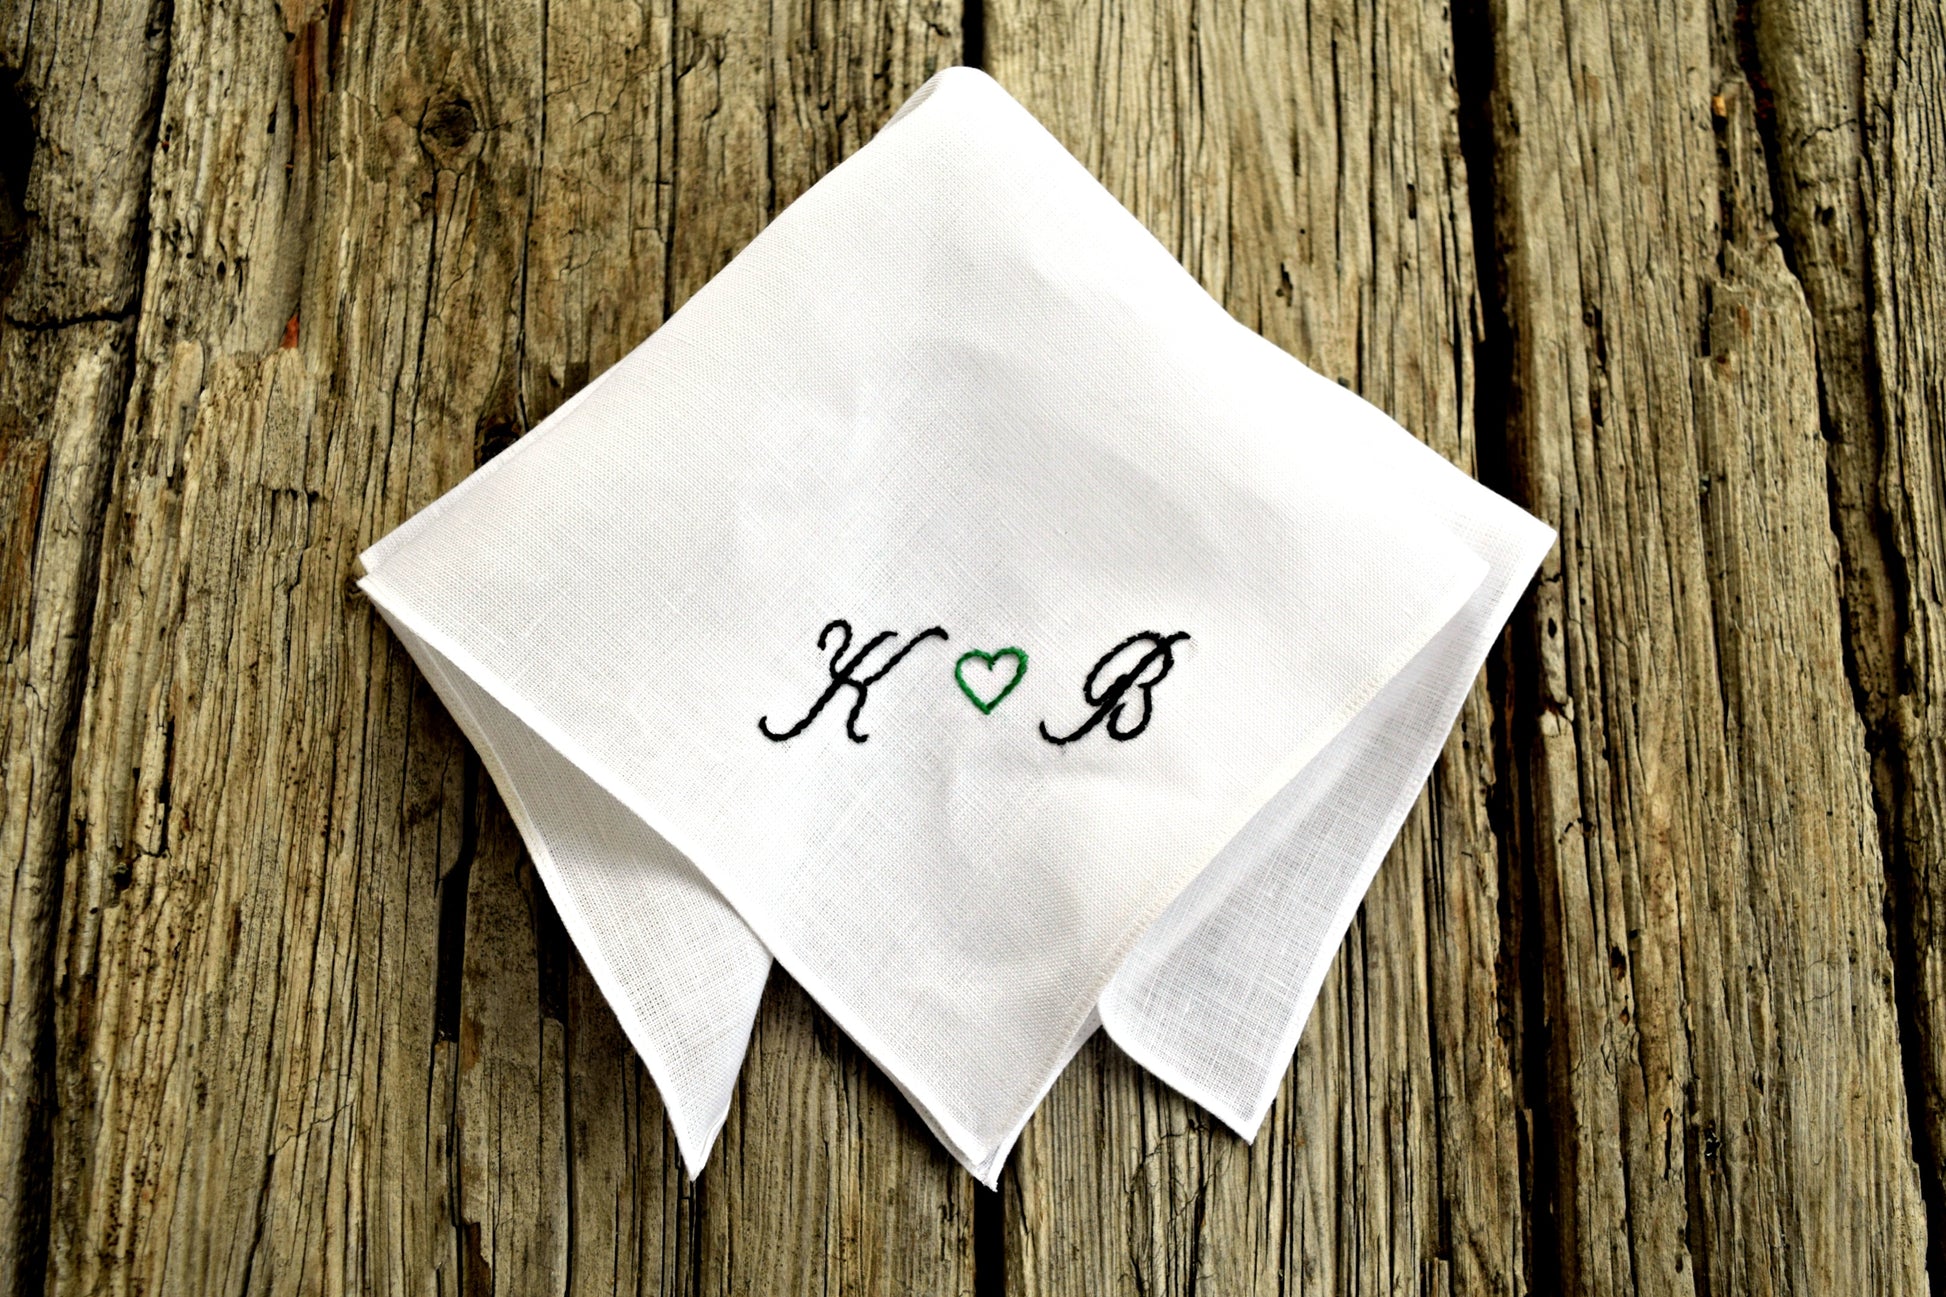 Folded Irish linen handkerchief embroidered with initials on wood ground